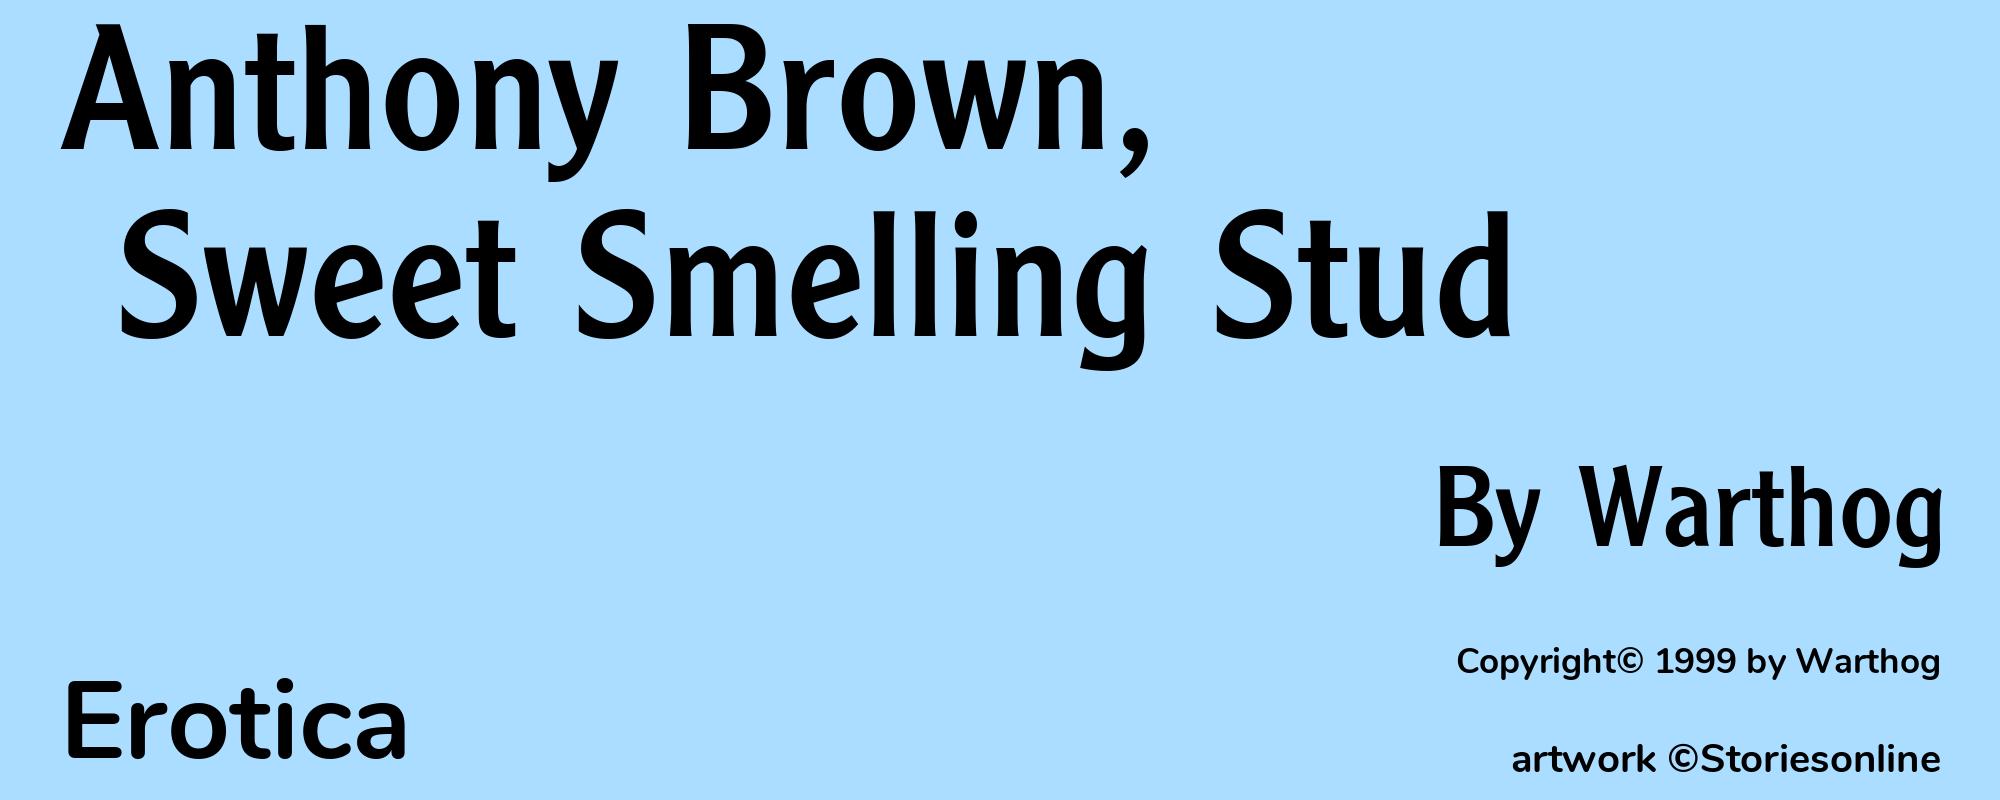 Anthony Brown, Sweet Smelling Stud - Cover